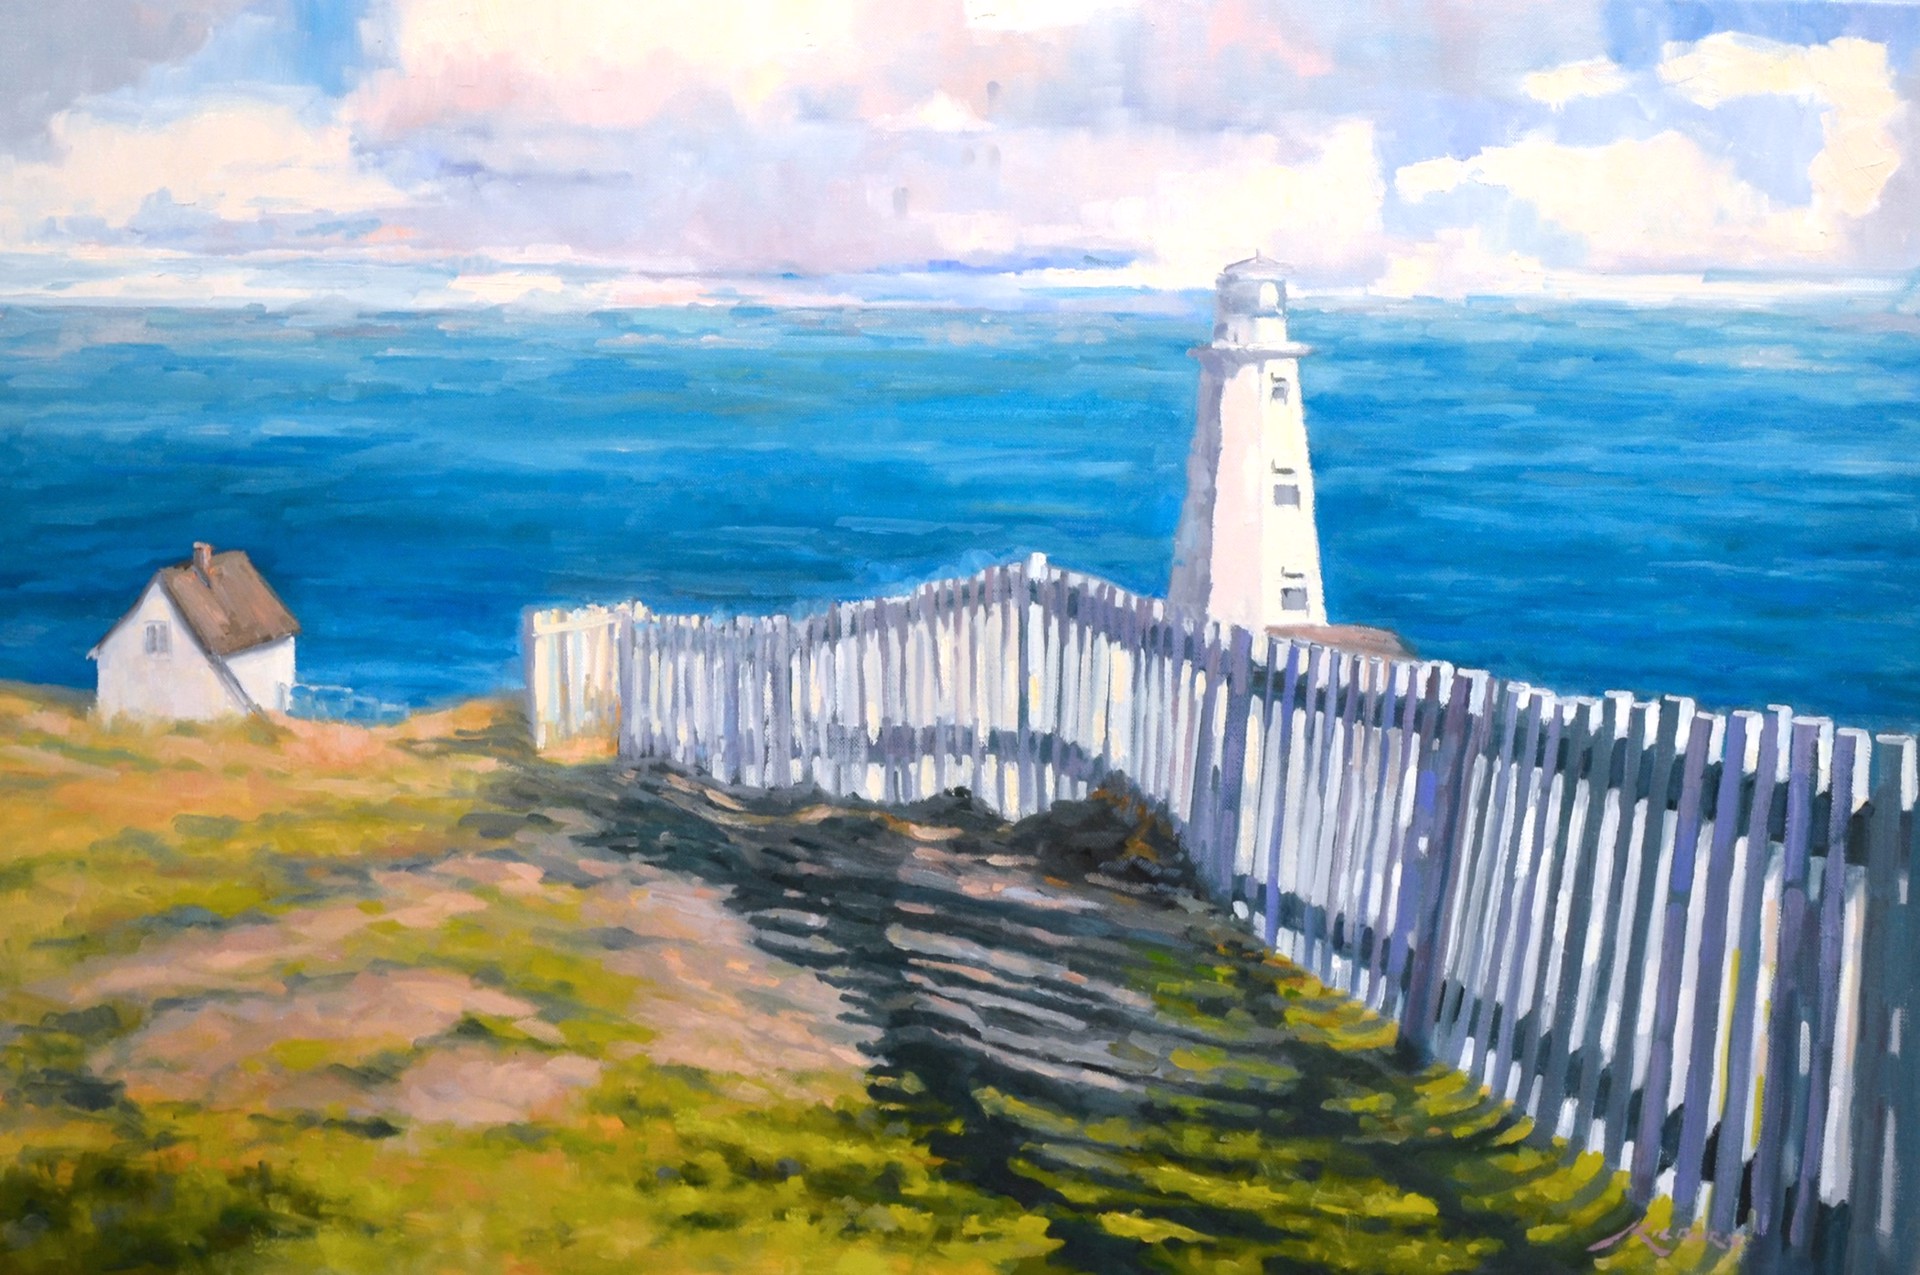 Fencing with Cape Spear by Michael Kilburn